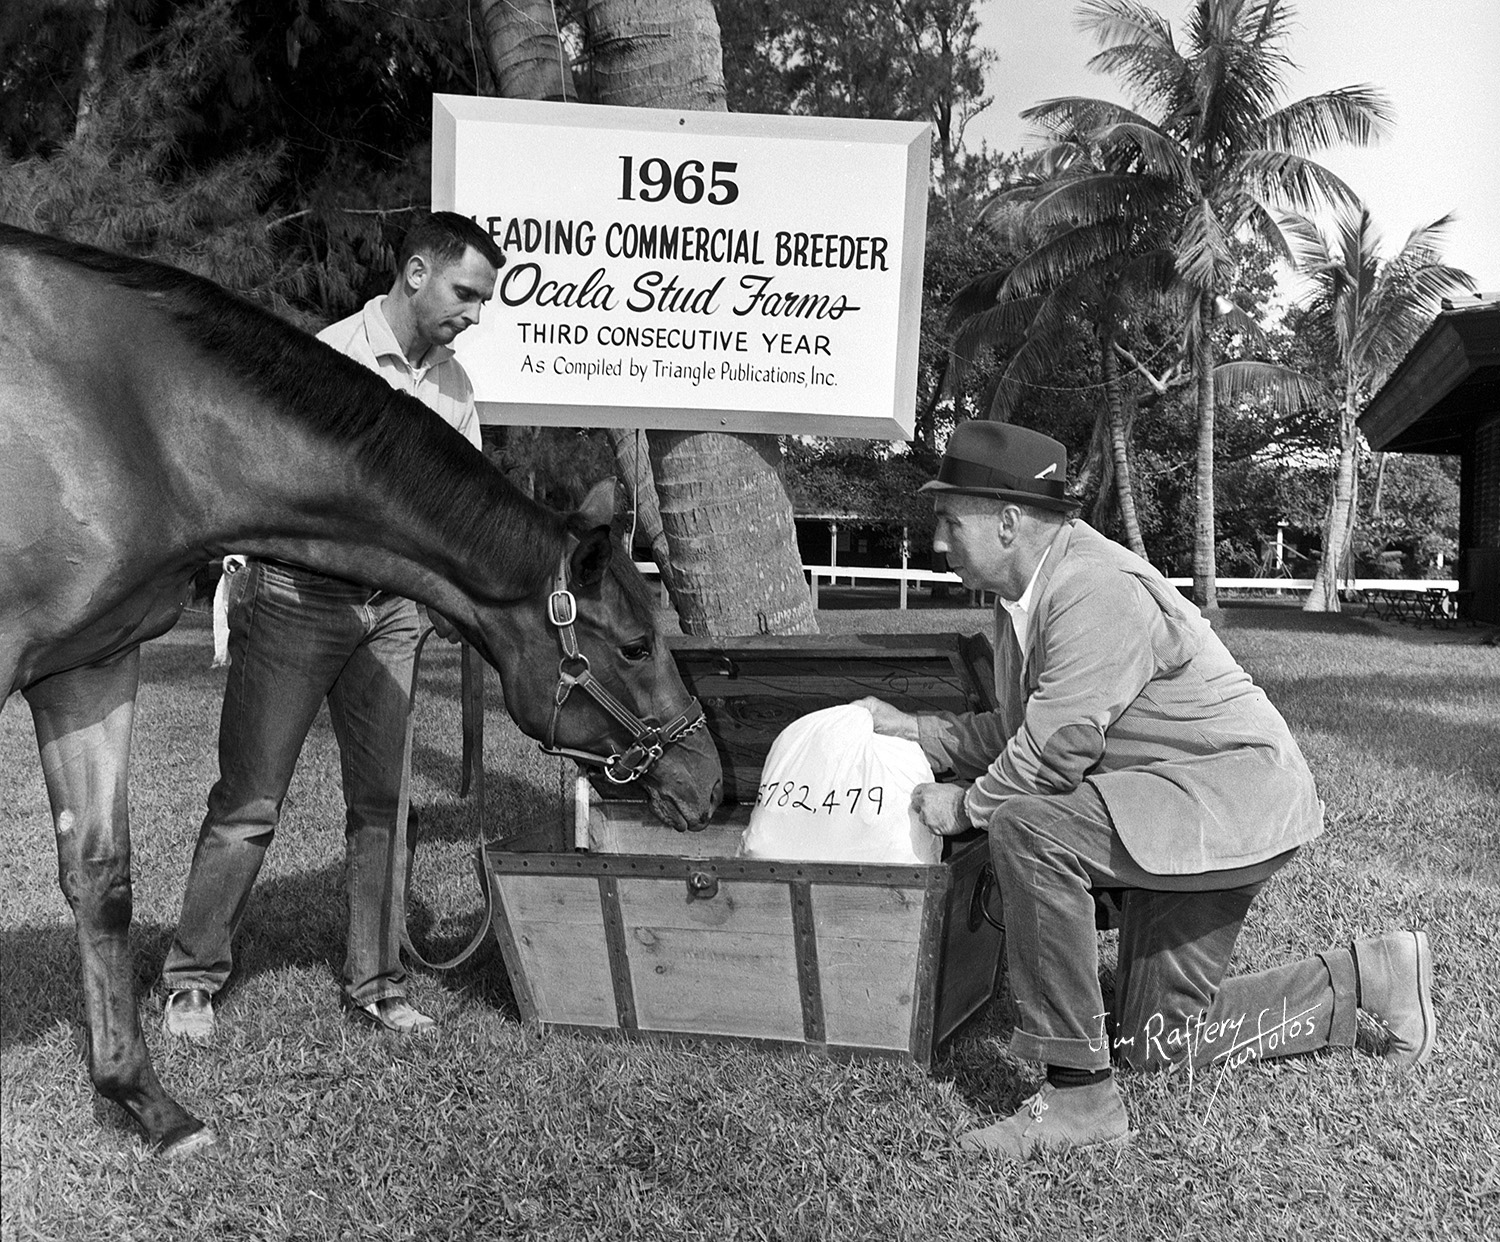 Double Treasure and Joe O'Farrell, upon Ocala Stud being named the 1965 leading commercial breeder, Jan. 19, 1966 (Jim Raftery Turfotos)